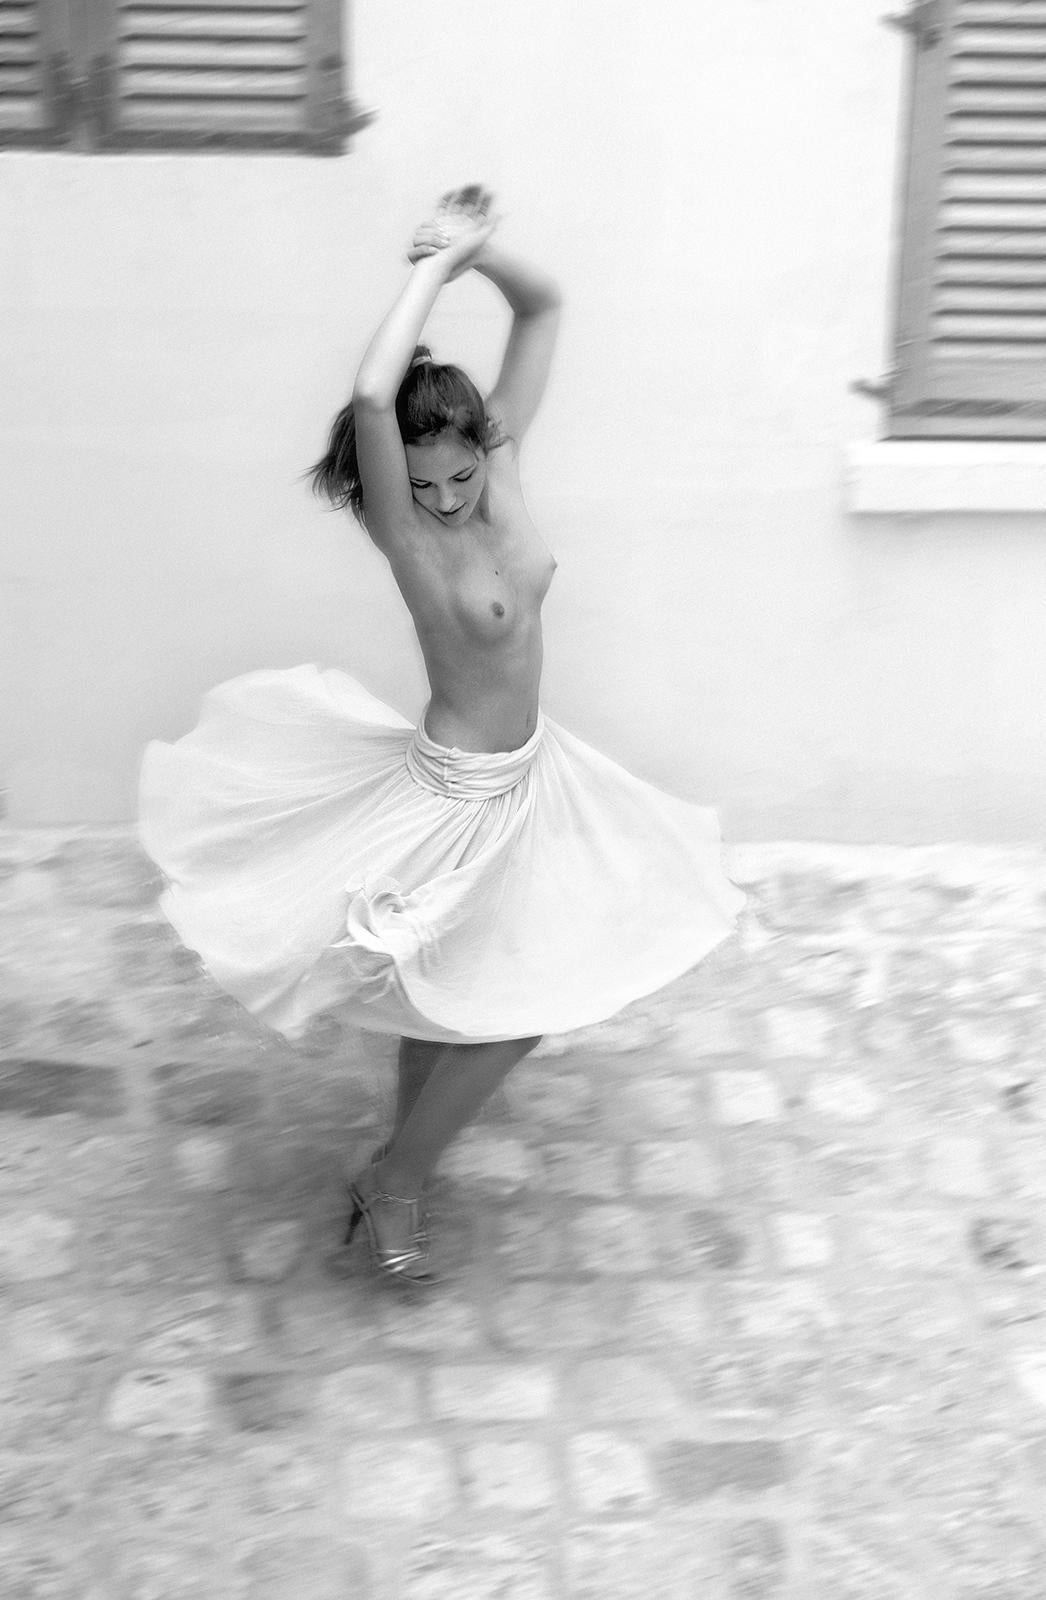 Ian Sanderson Black and White Photograph - Ariane 2- Signed limited edition art print, Contemporary, Romantic, Dancer